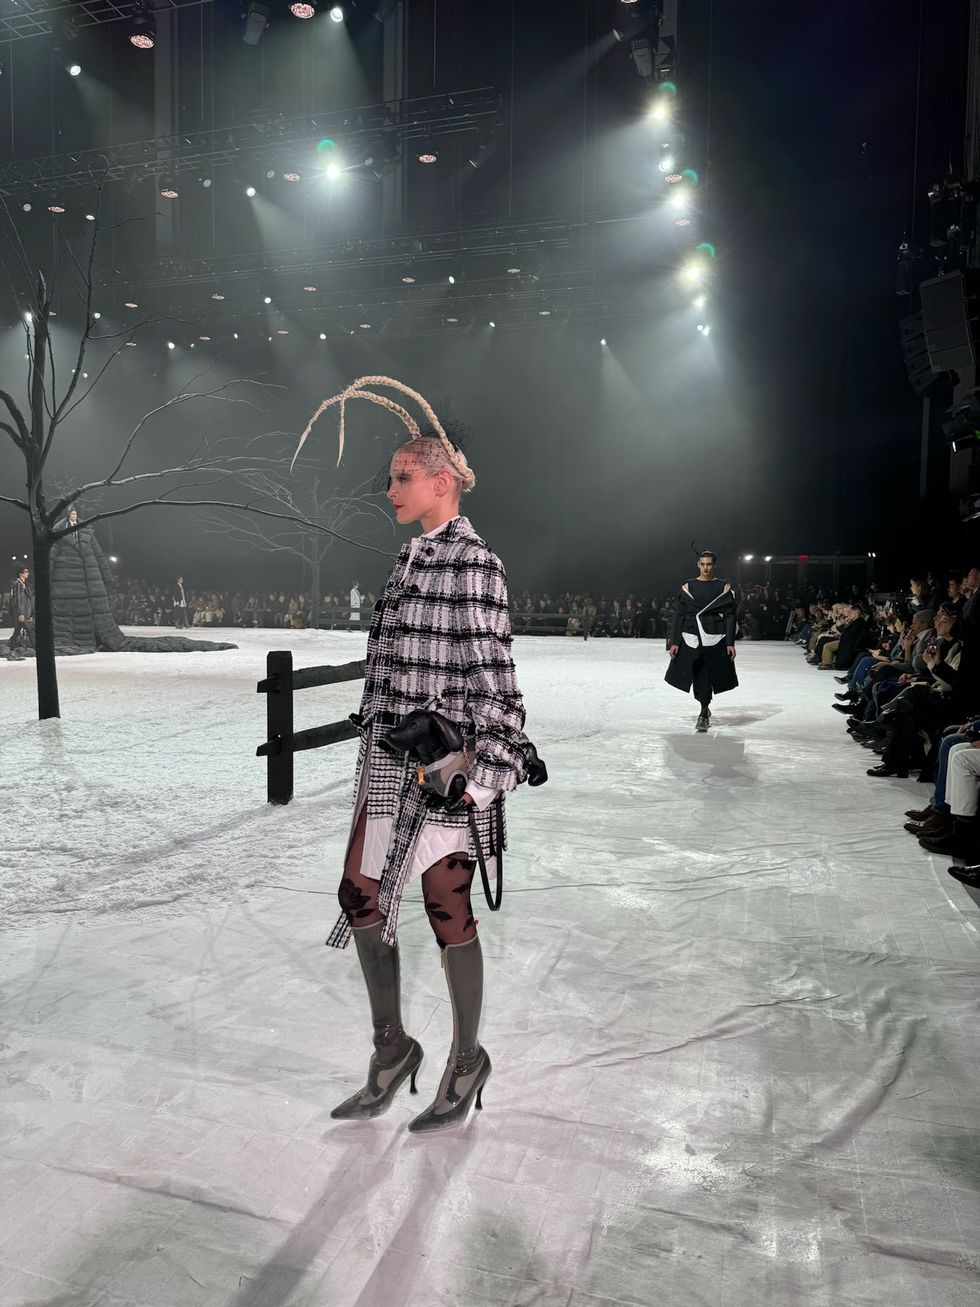 a person wearing a plaid dress and ice skates